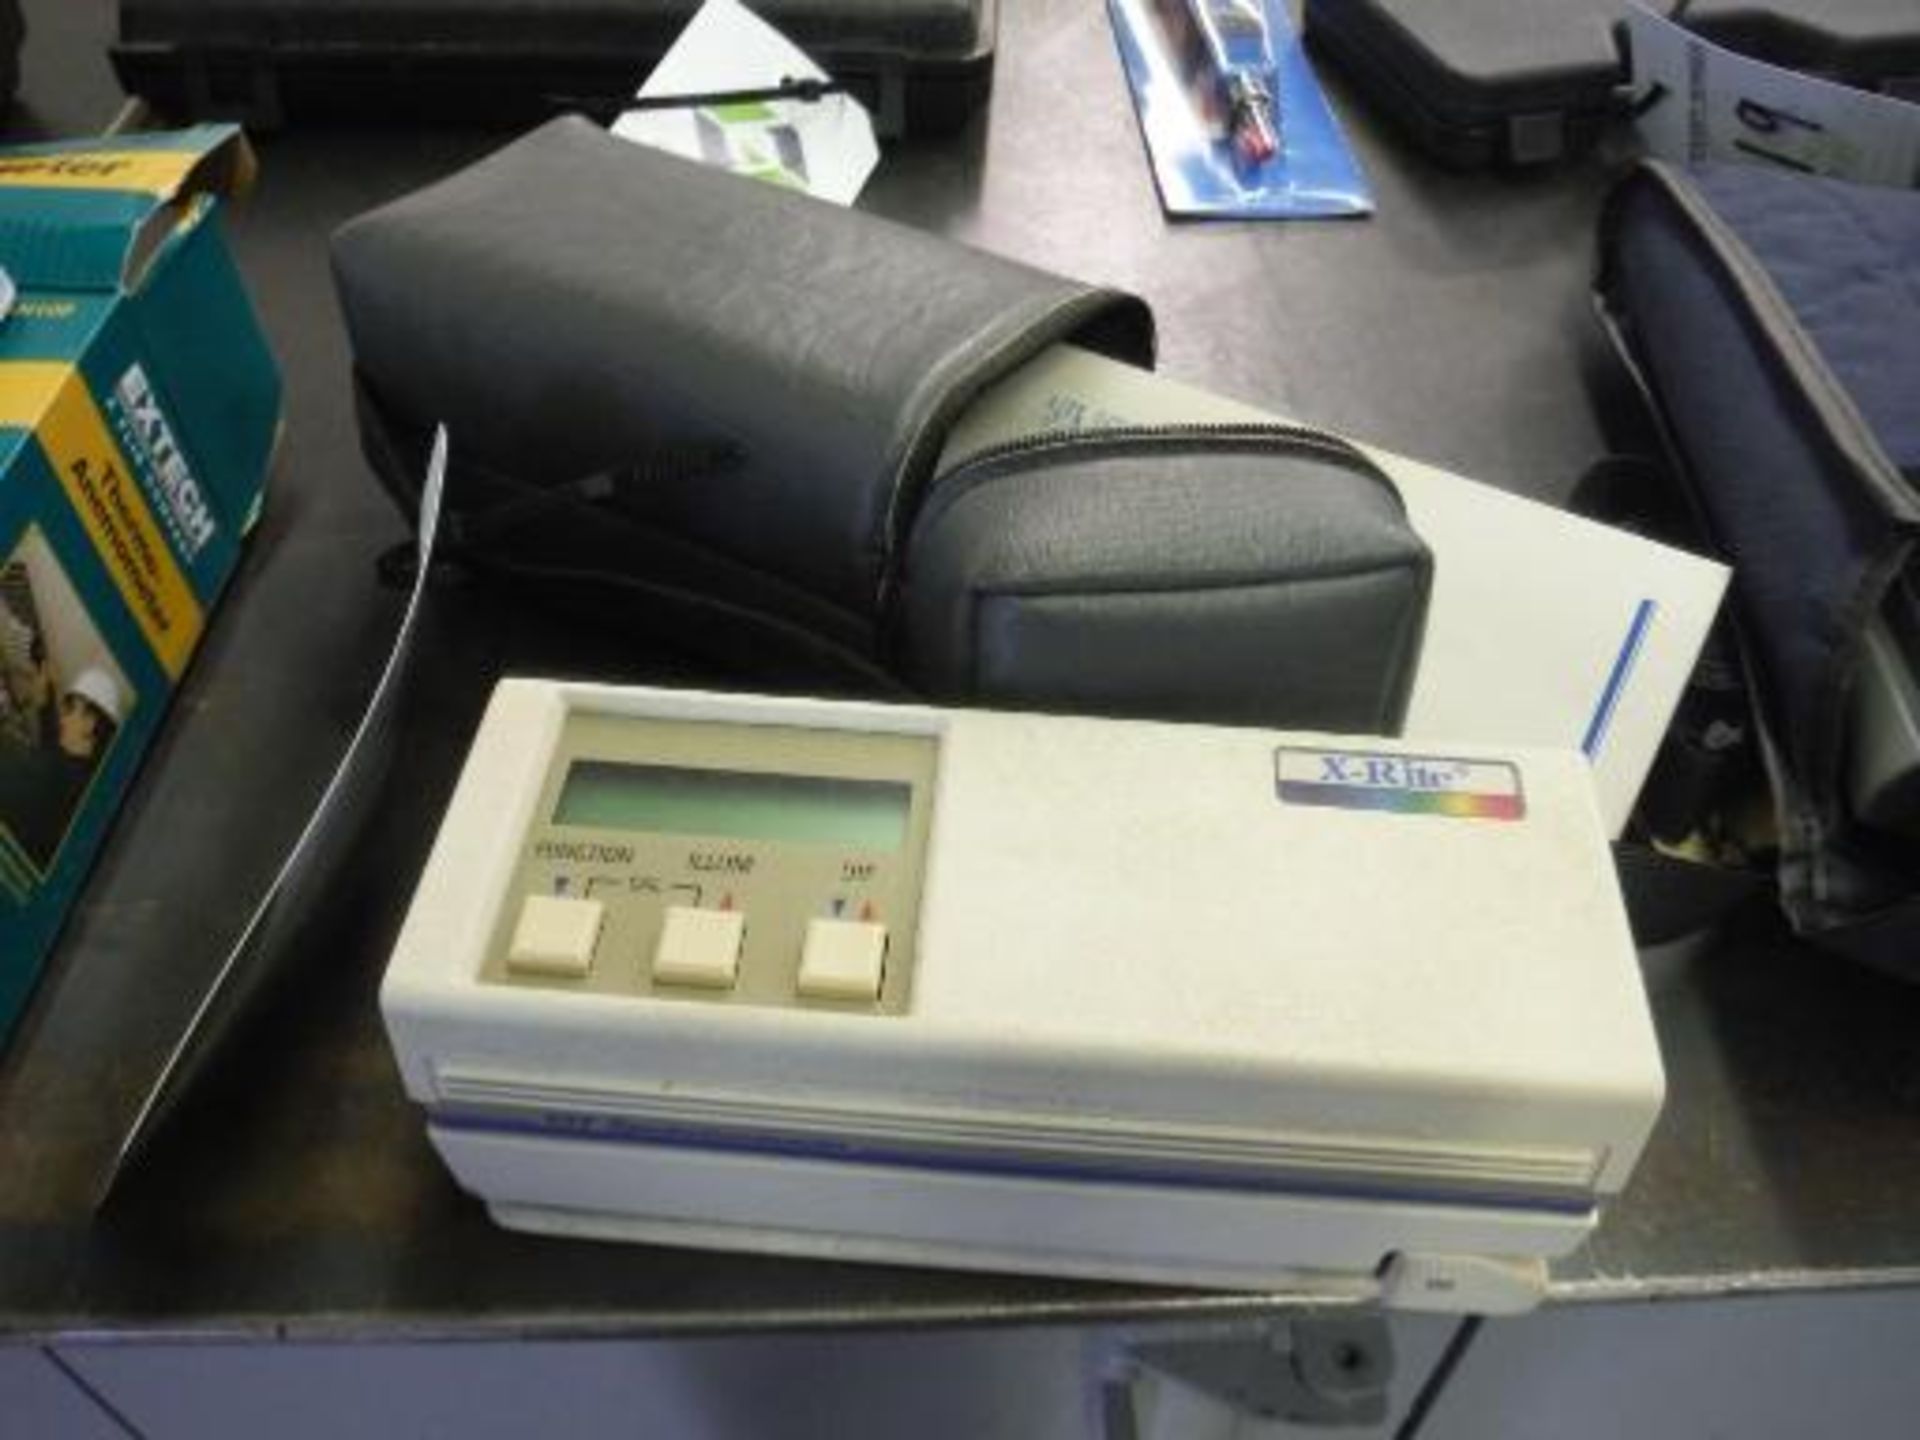 X-Rite 938 Spectrodensitometer in case. Located in Marion, Ohio Rigging Fee: $25